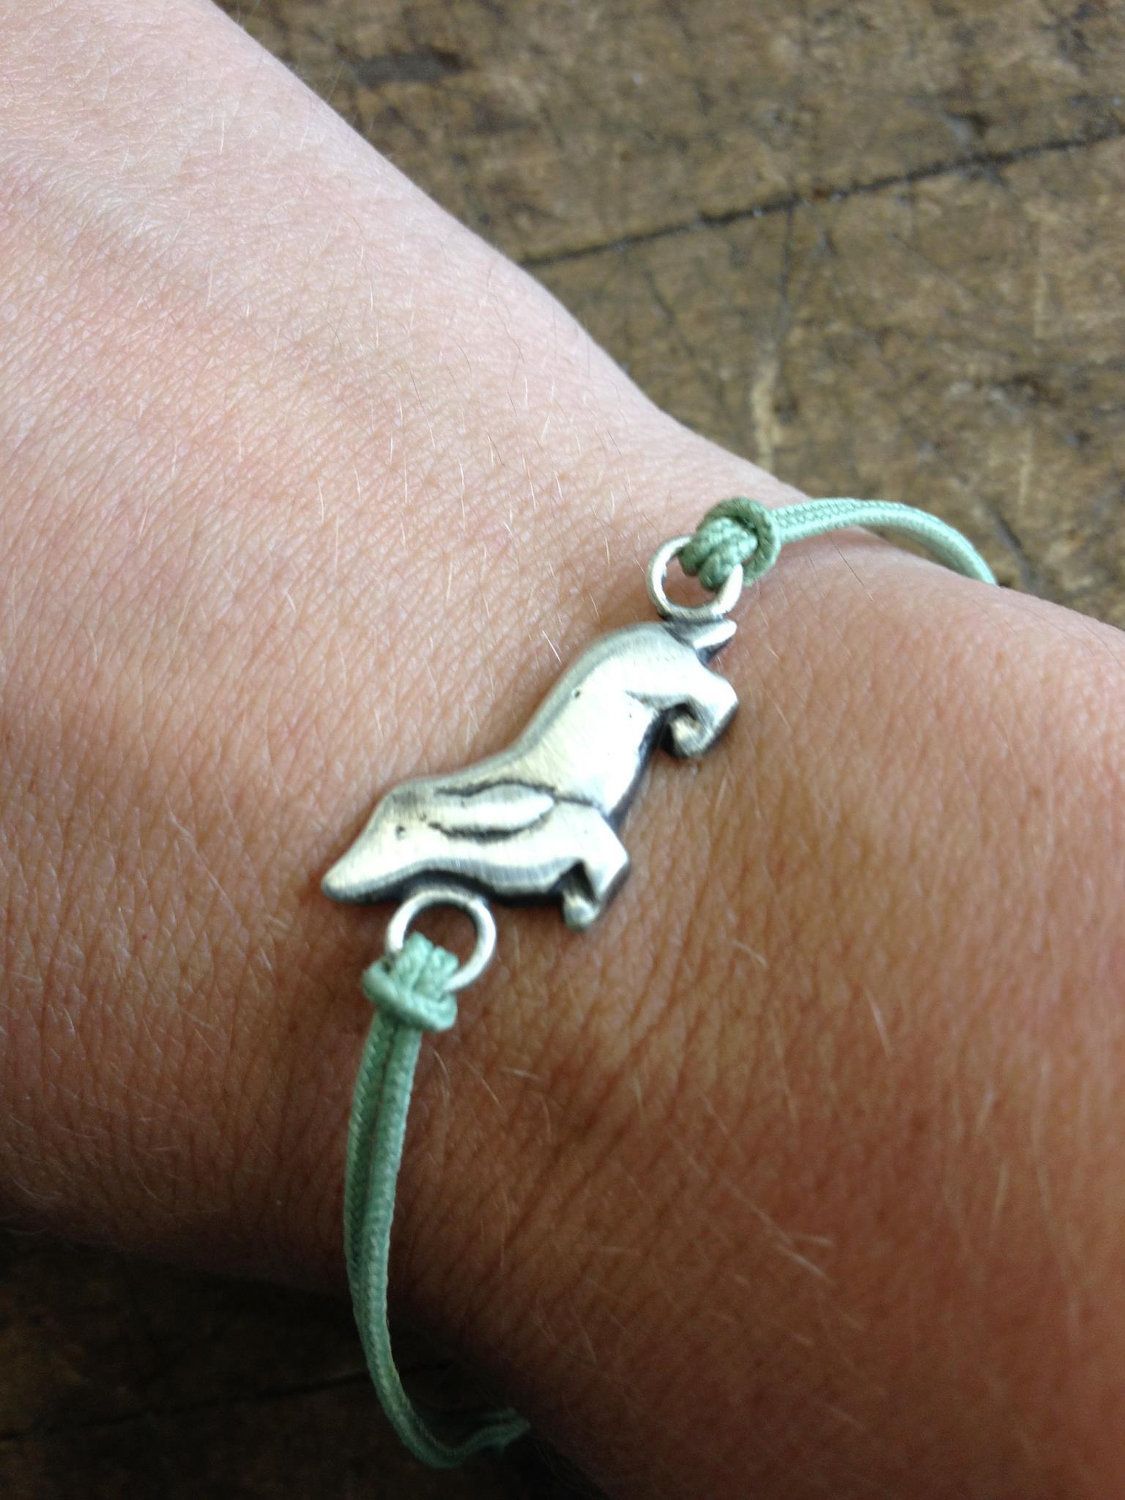 Mini Sterling Silver Dachshund Friendship Bracelet with Textile Cord